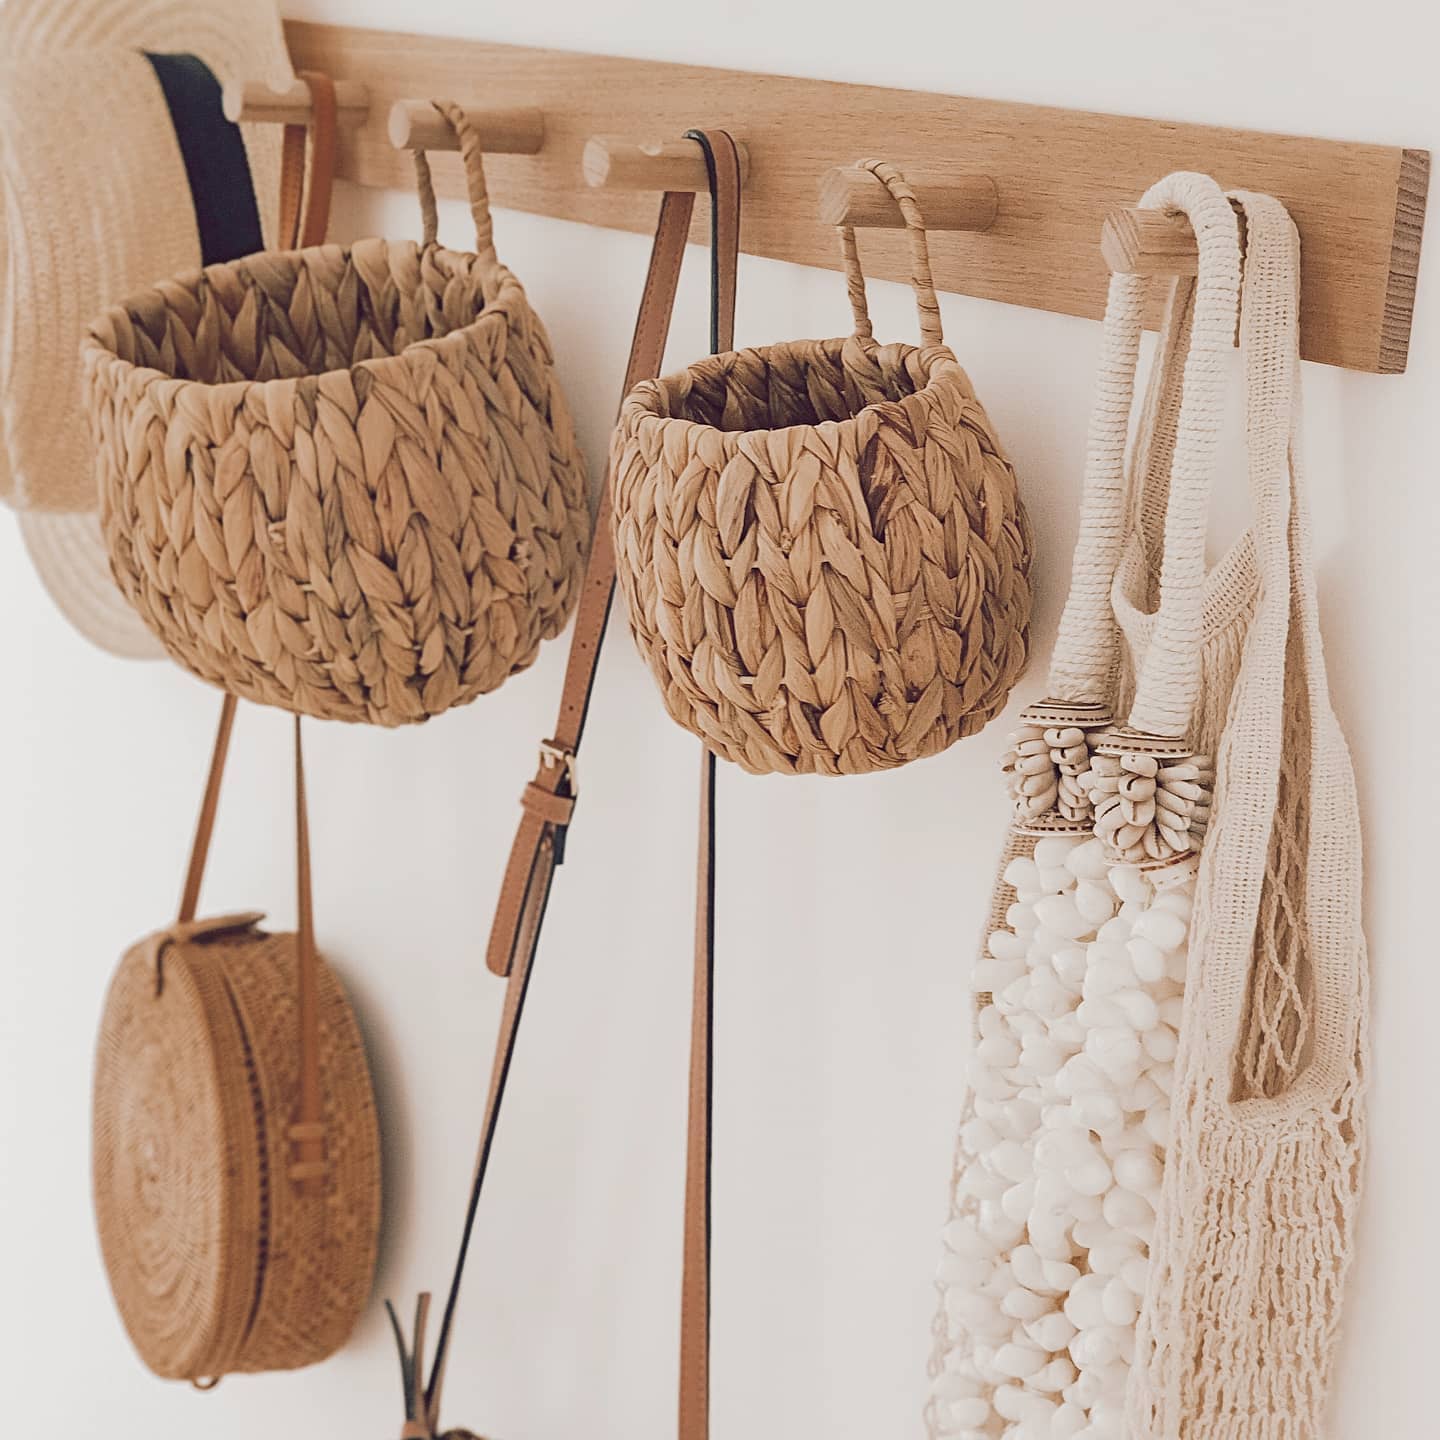 Clever storage solution: Wicker baskets hanging on a wall for a more efficient home.